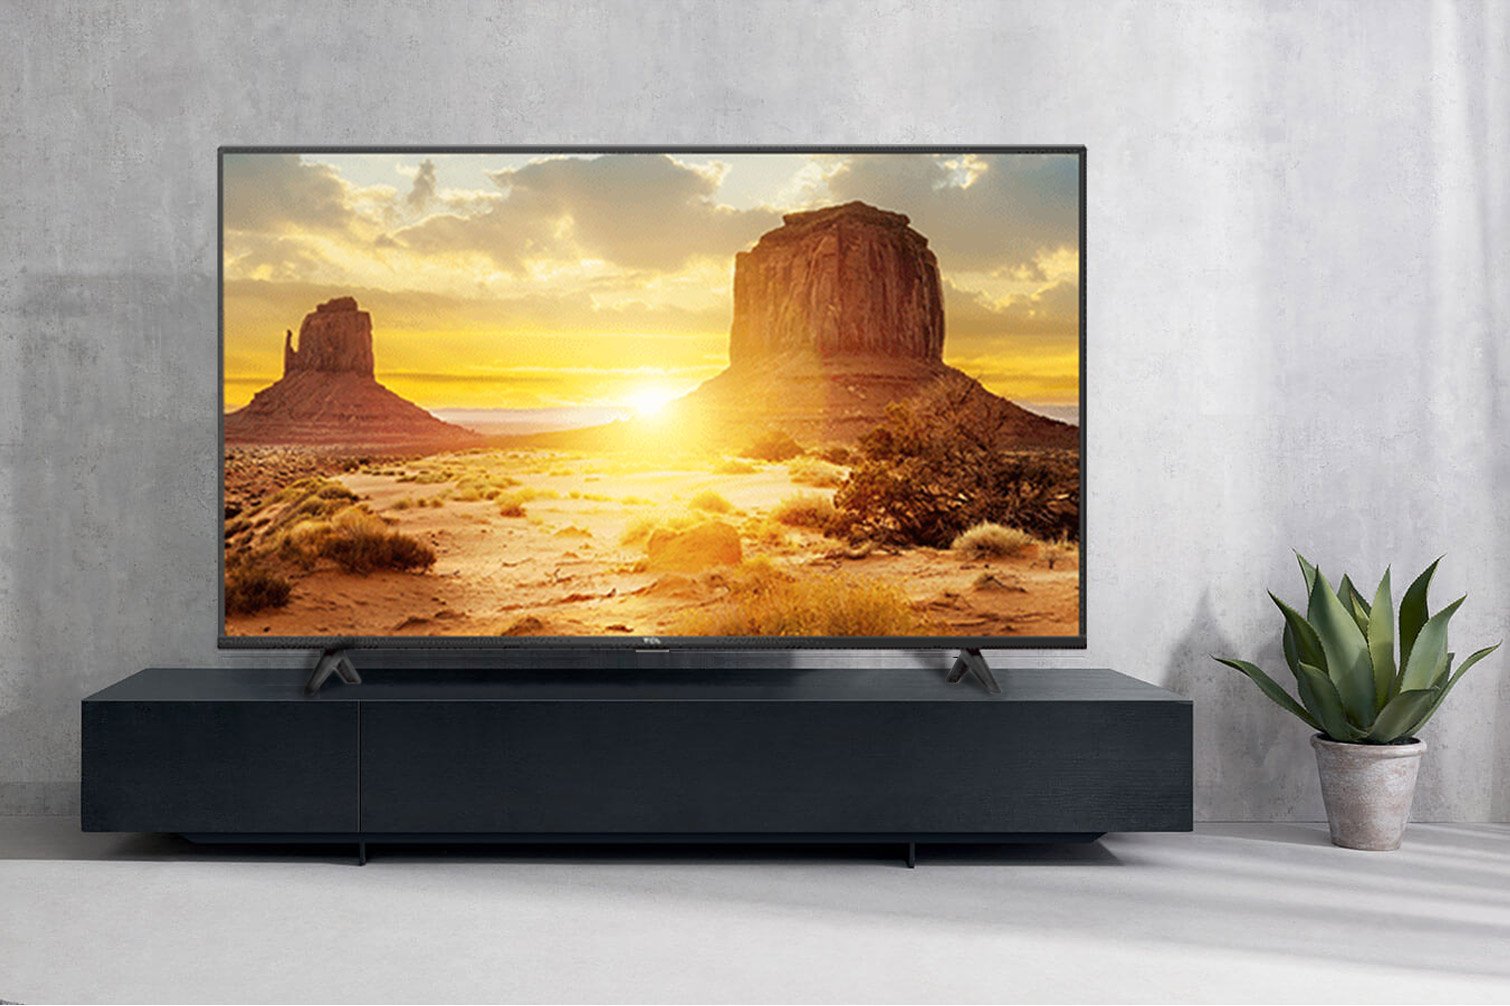 Smart Tivi TCL 4K 50P618 50 inch Android TV